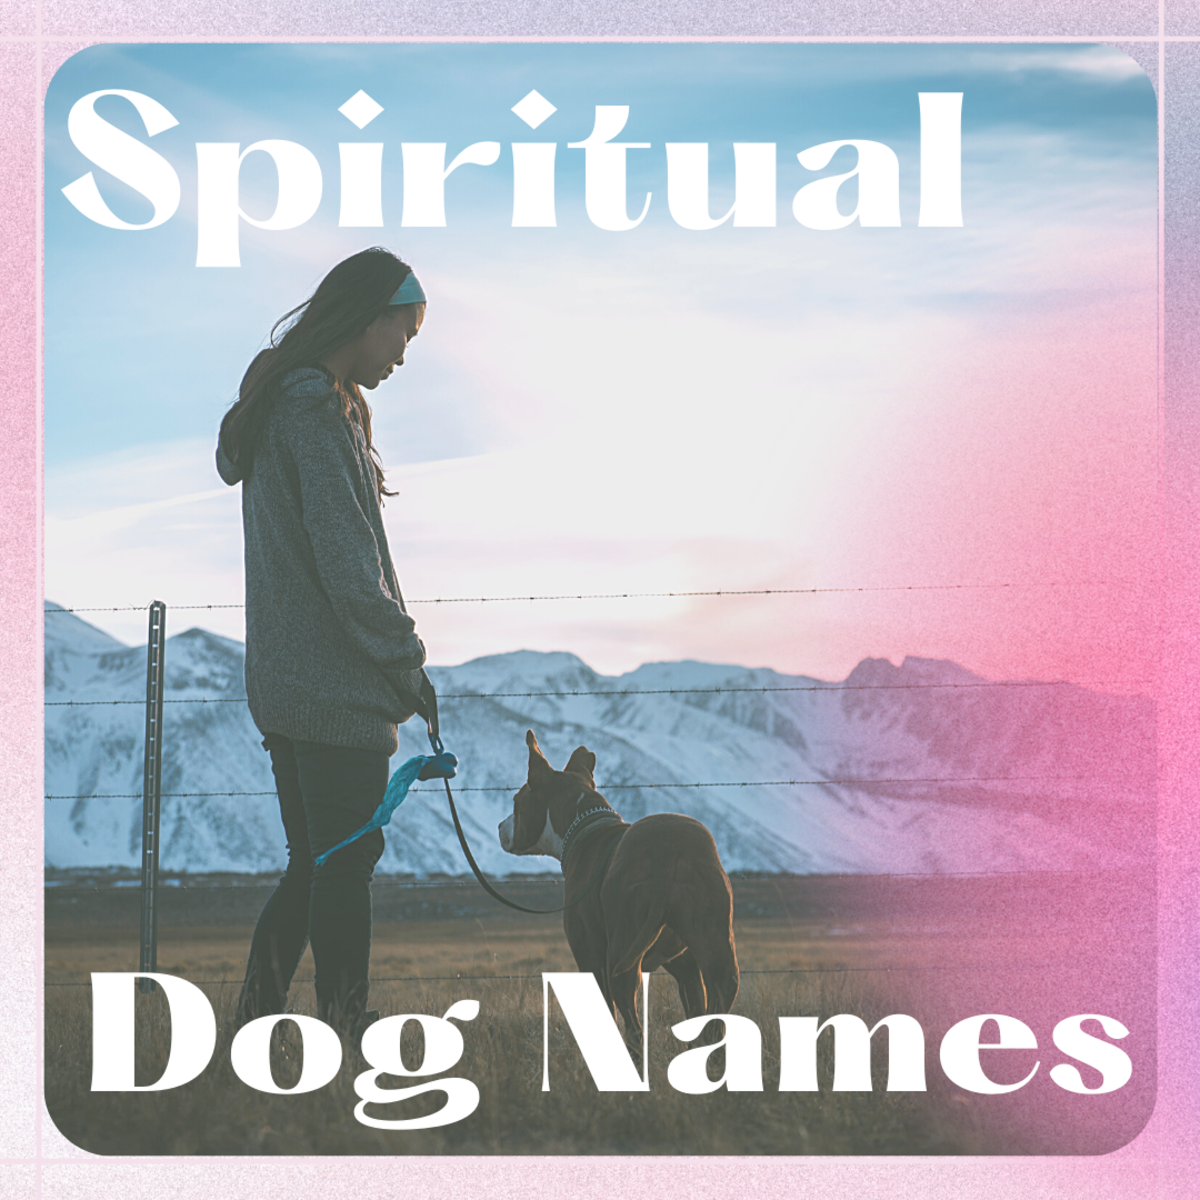 140 Meaningful, Mystical and Spiritual Names for Dogs - PetHelpful